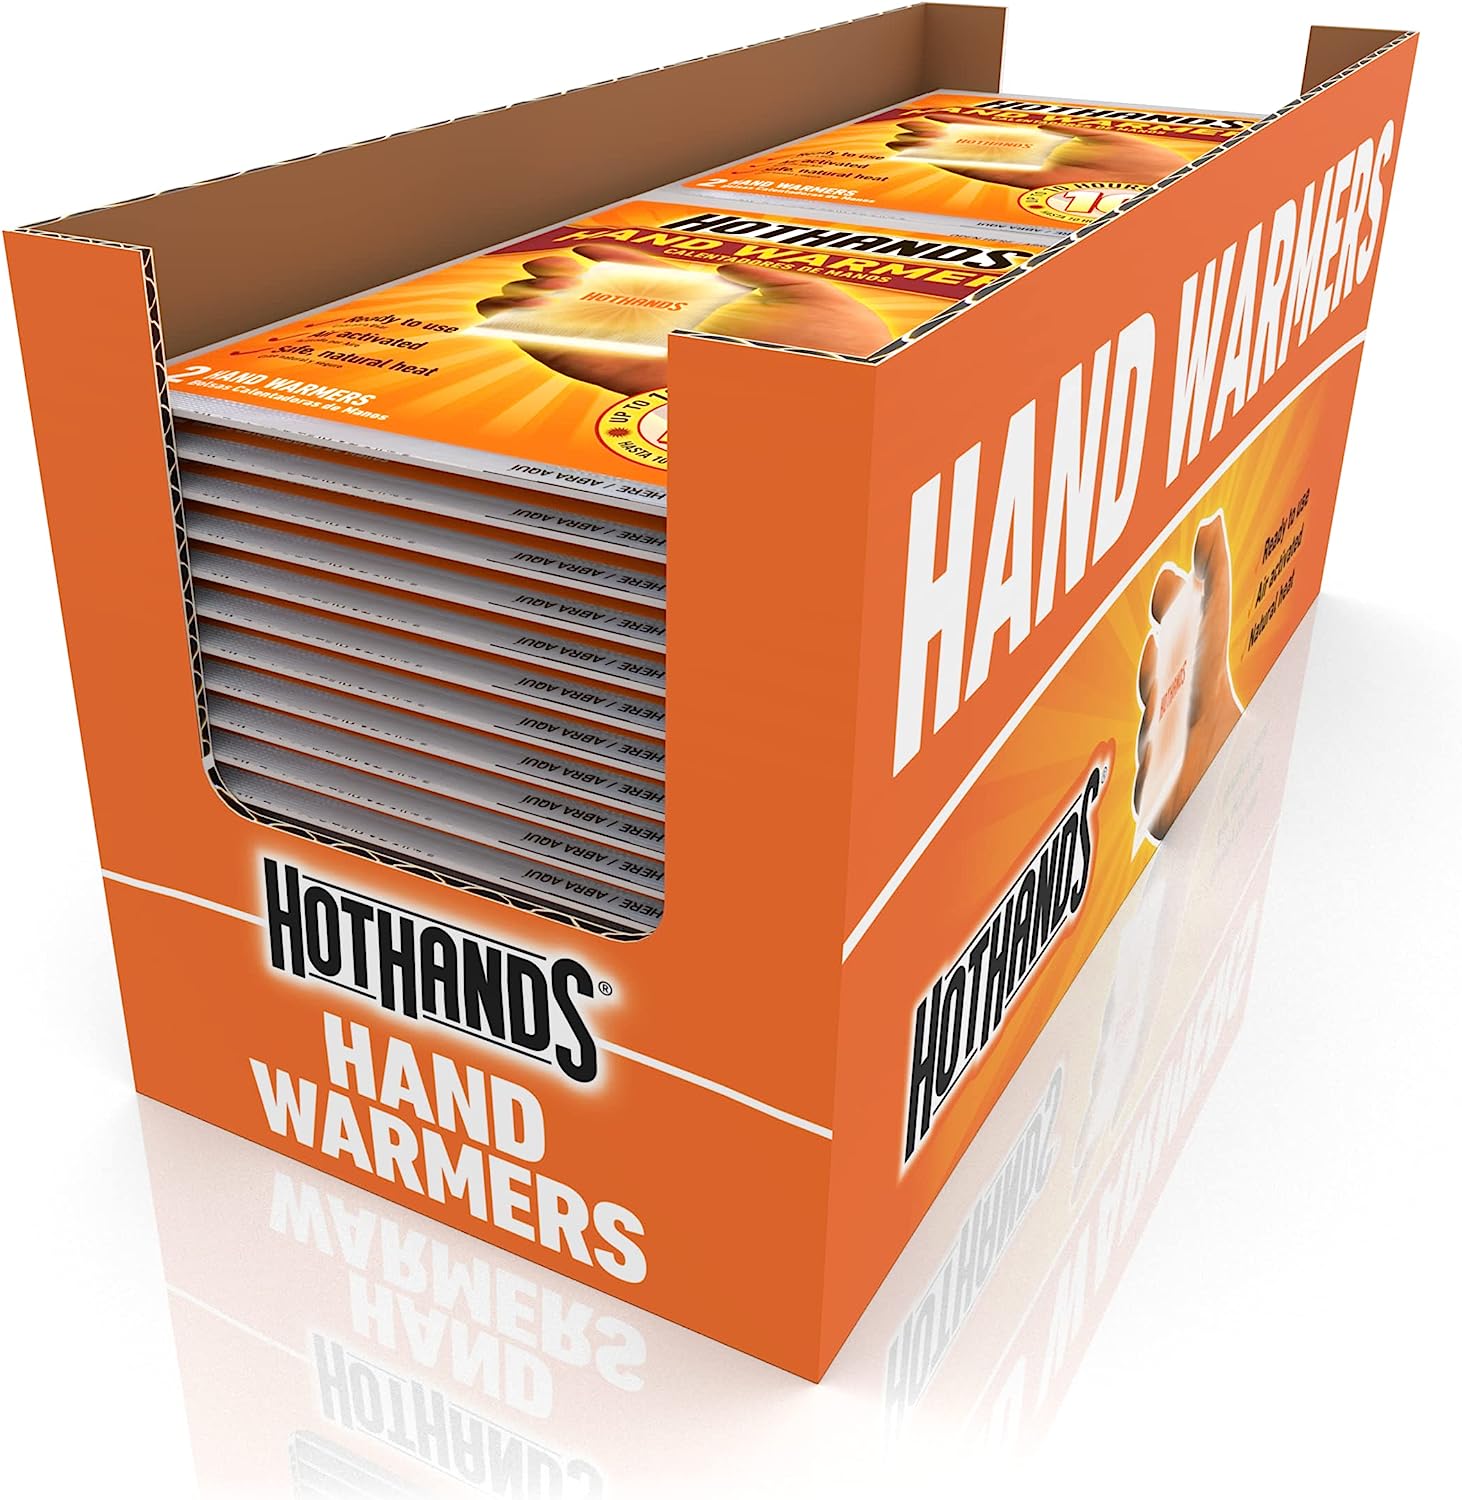 HotHands Hand Warmers - Long Lasting Safe Natural [...]